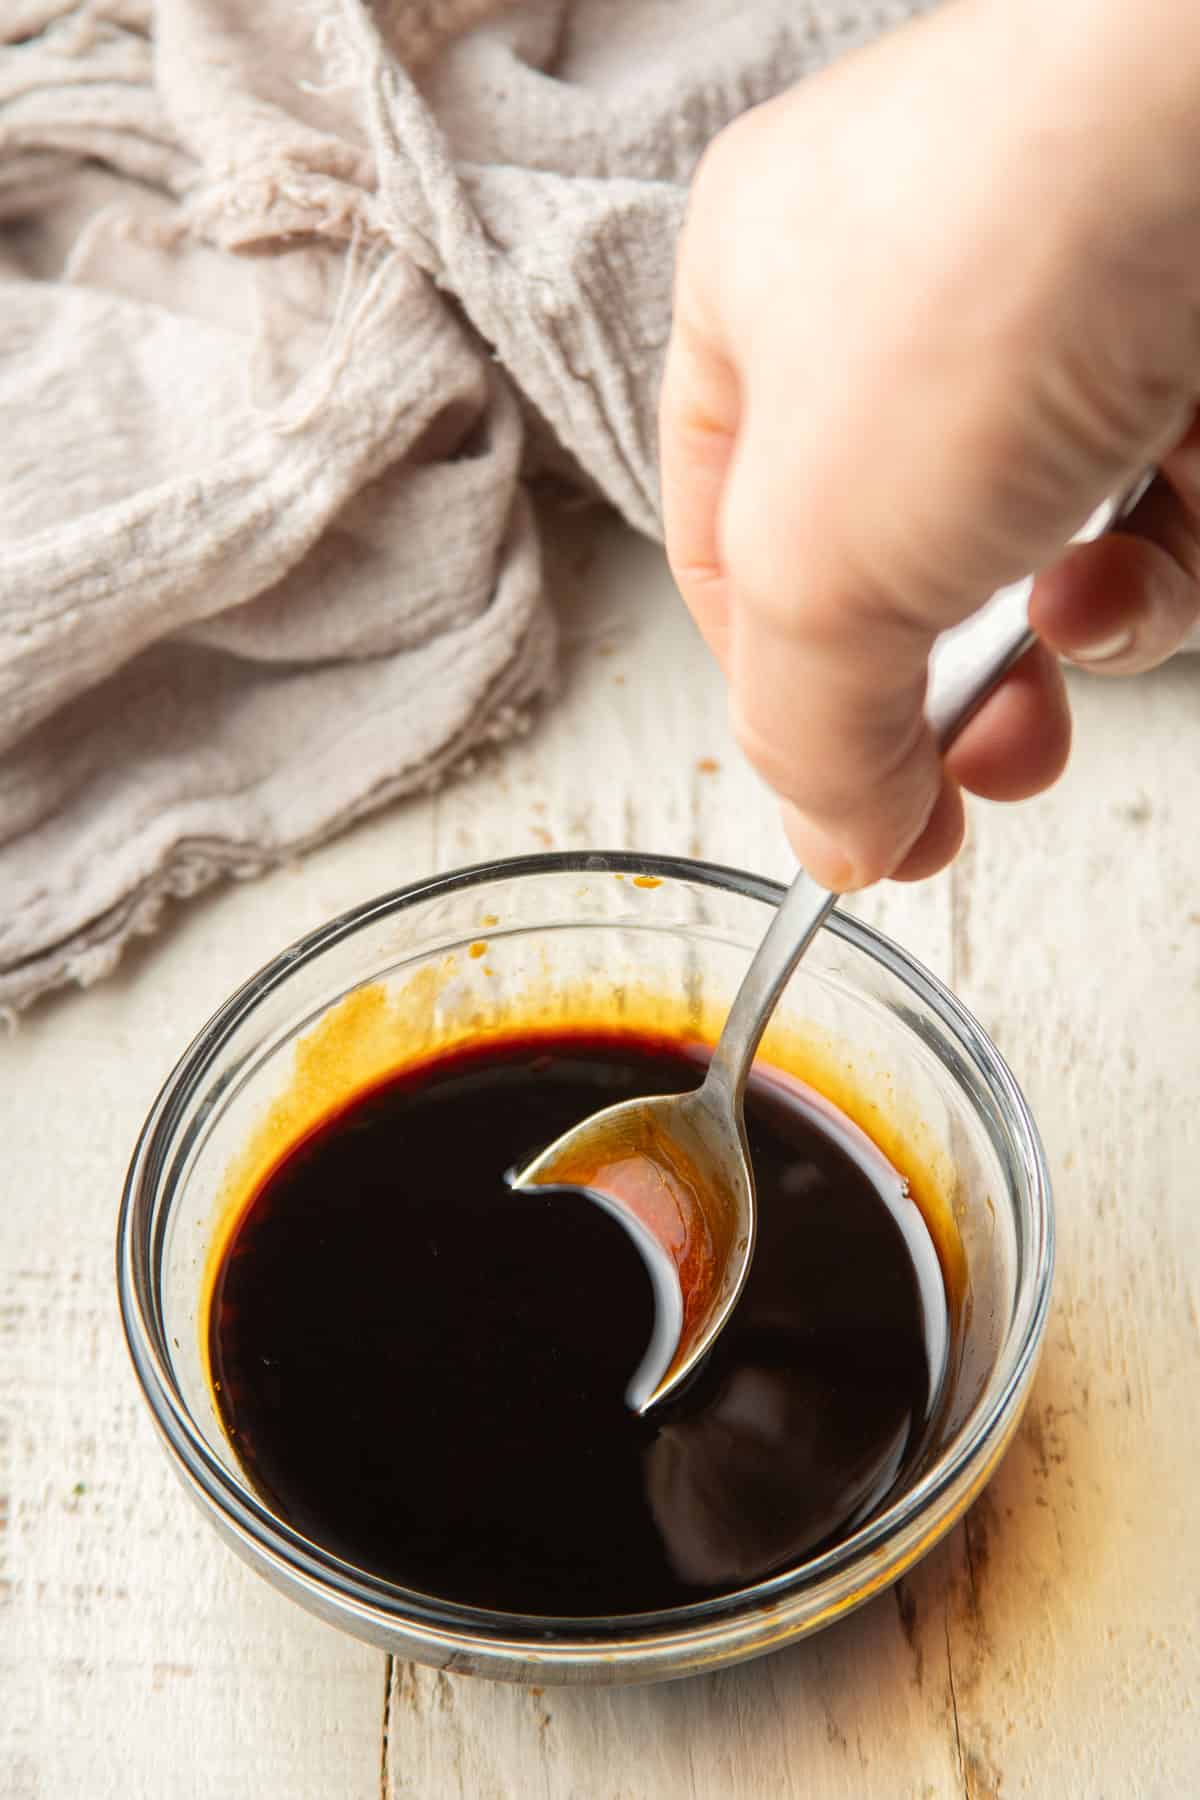 Hand stirring sauce in a small glass bowl.